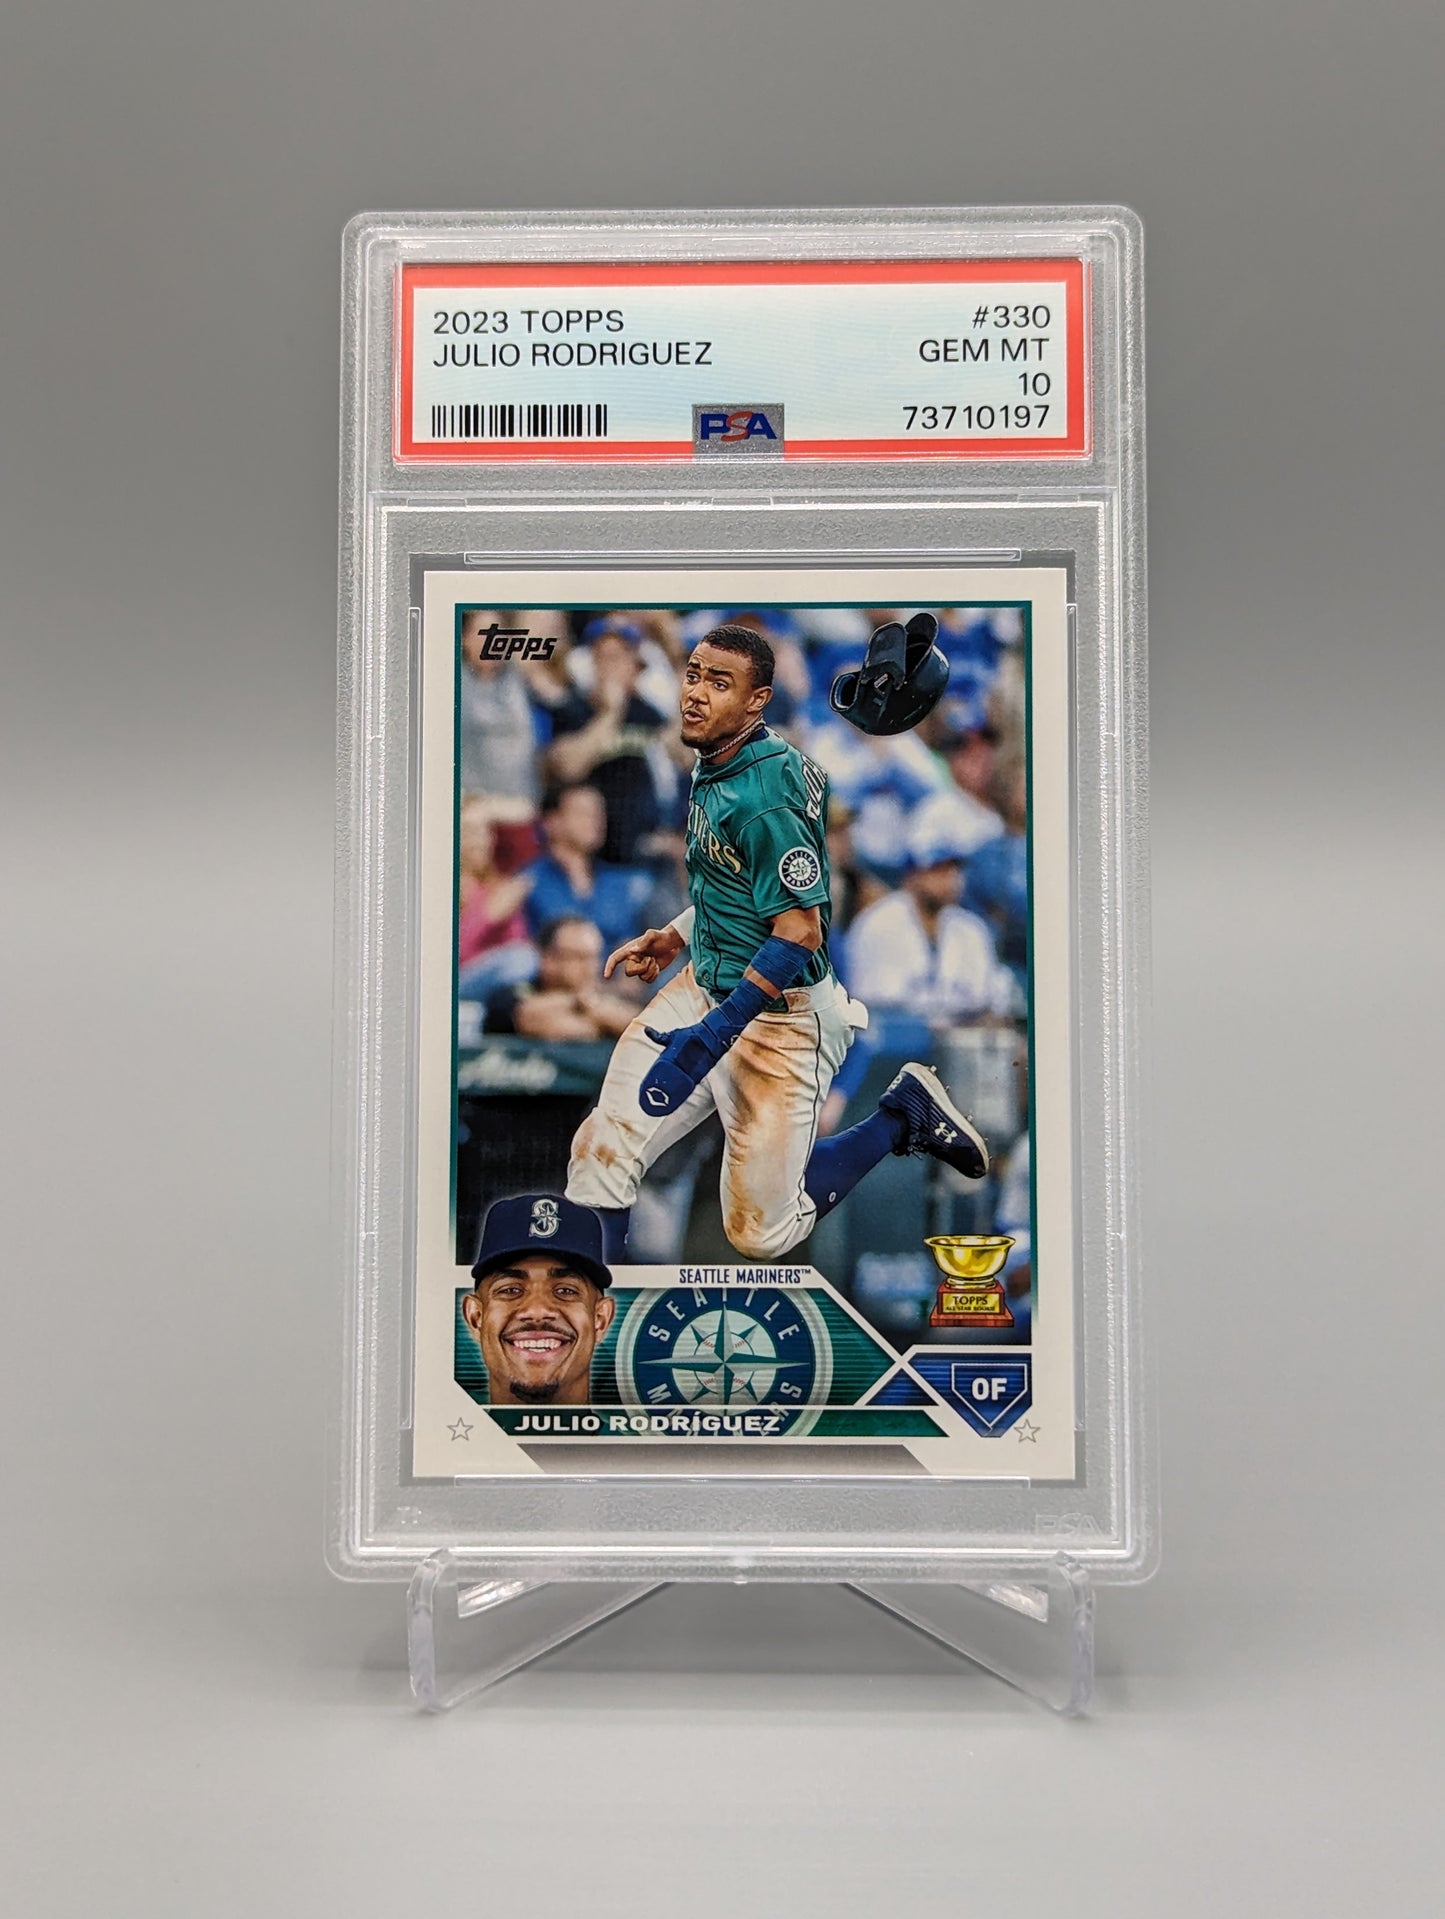 2023 Topps #330 Julio Rodriguez RC Cup Mariners PSA 10